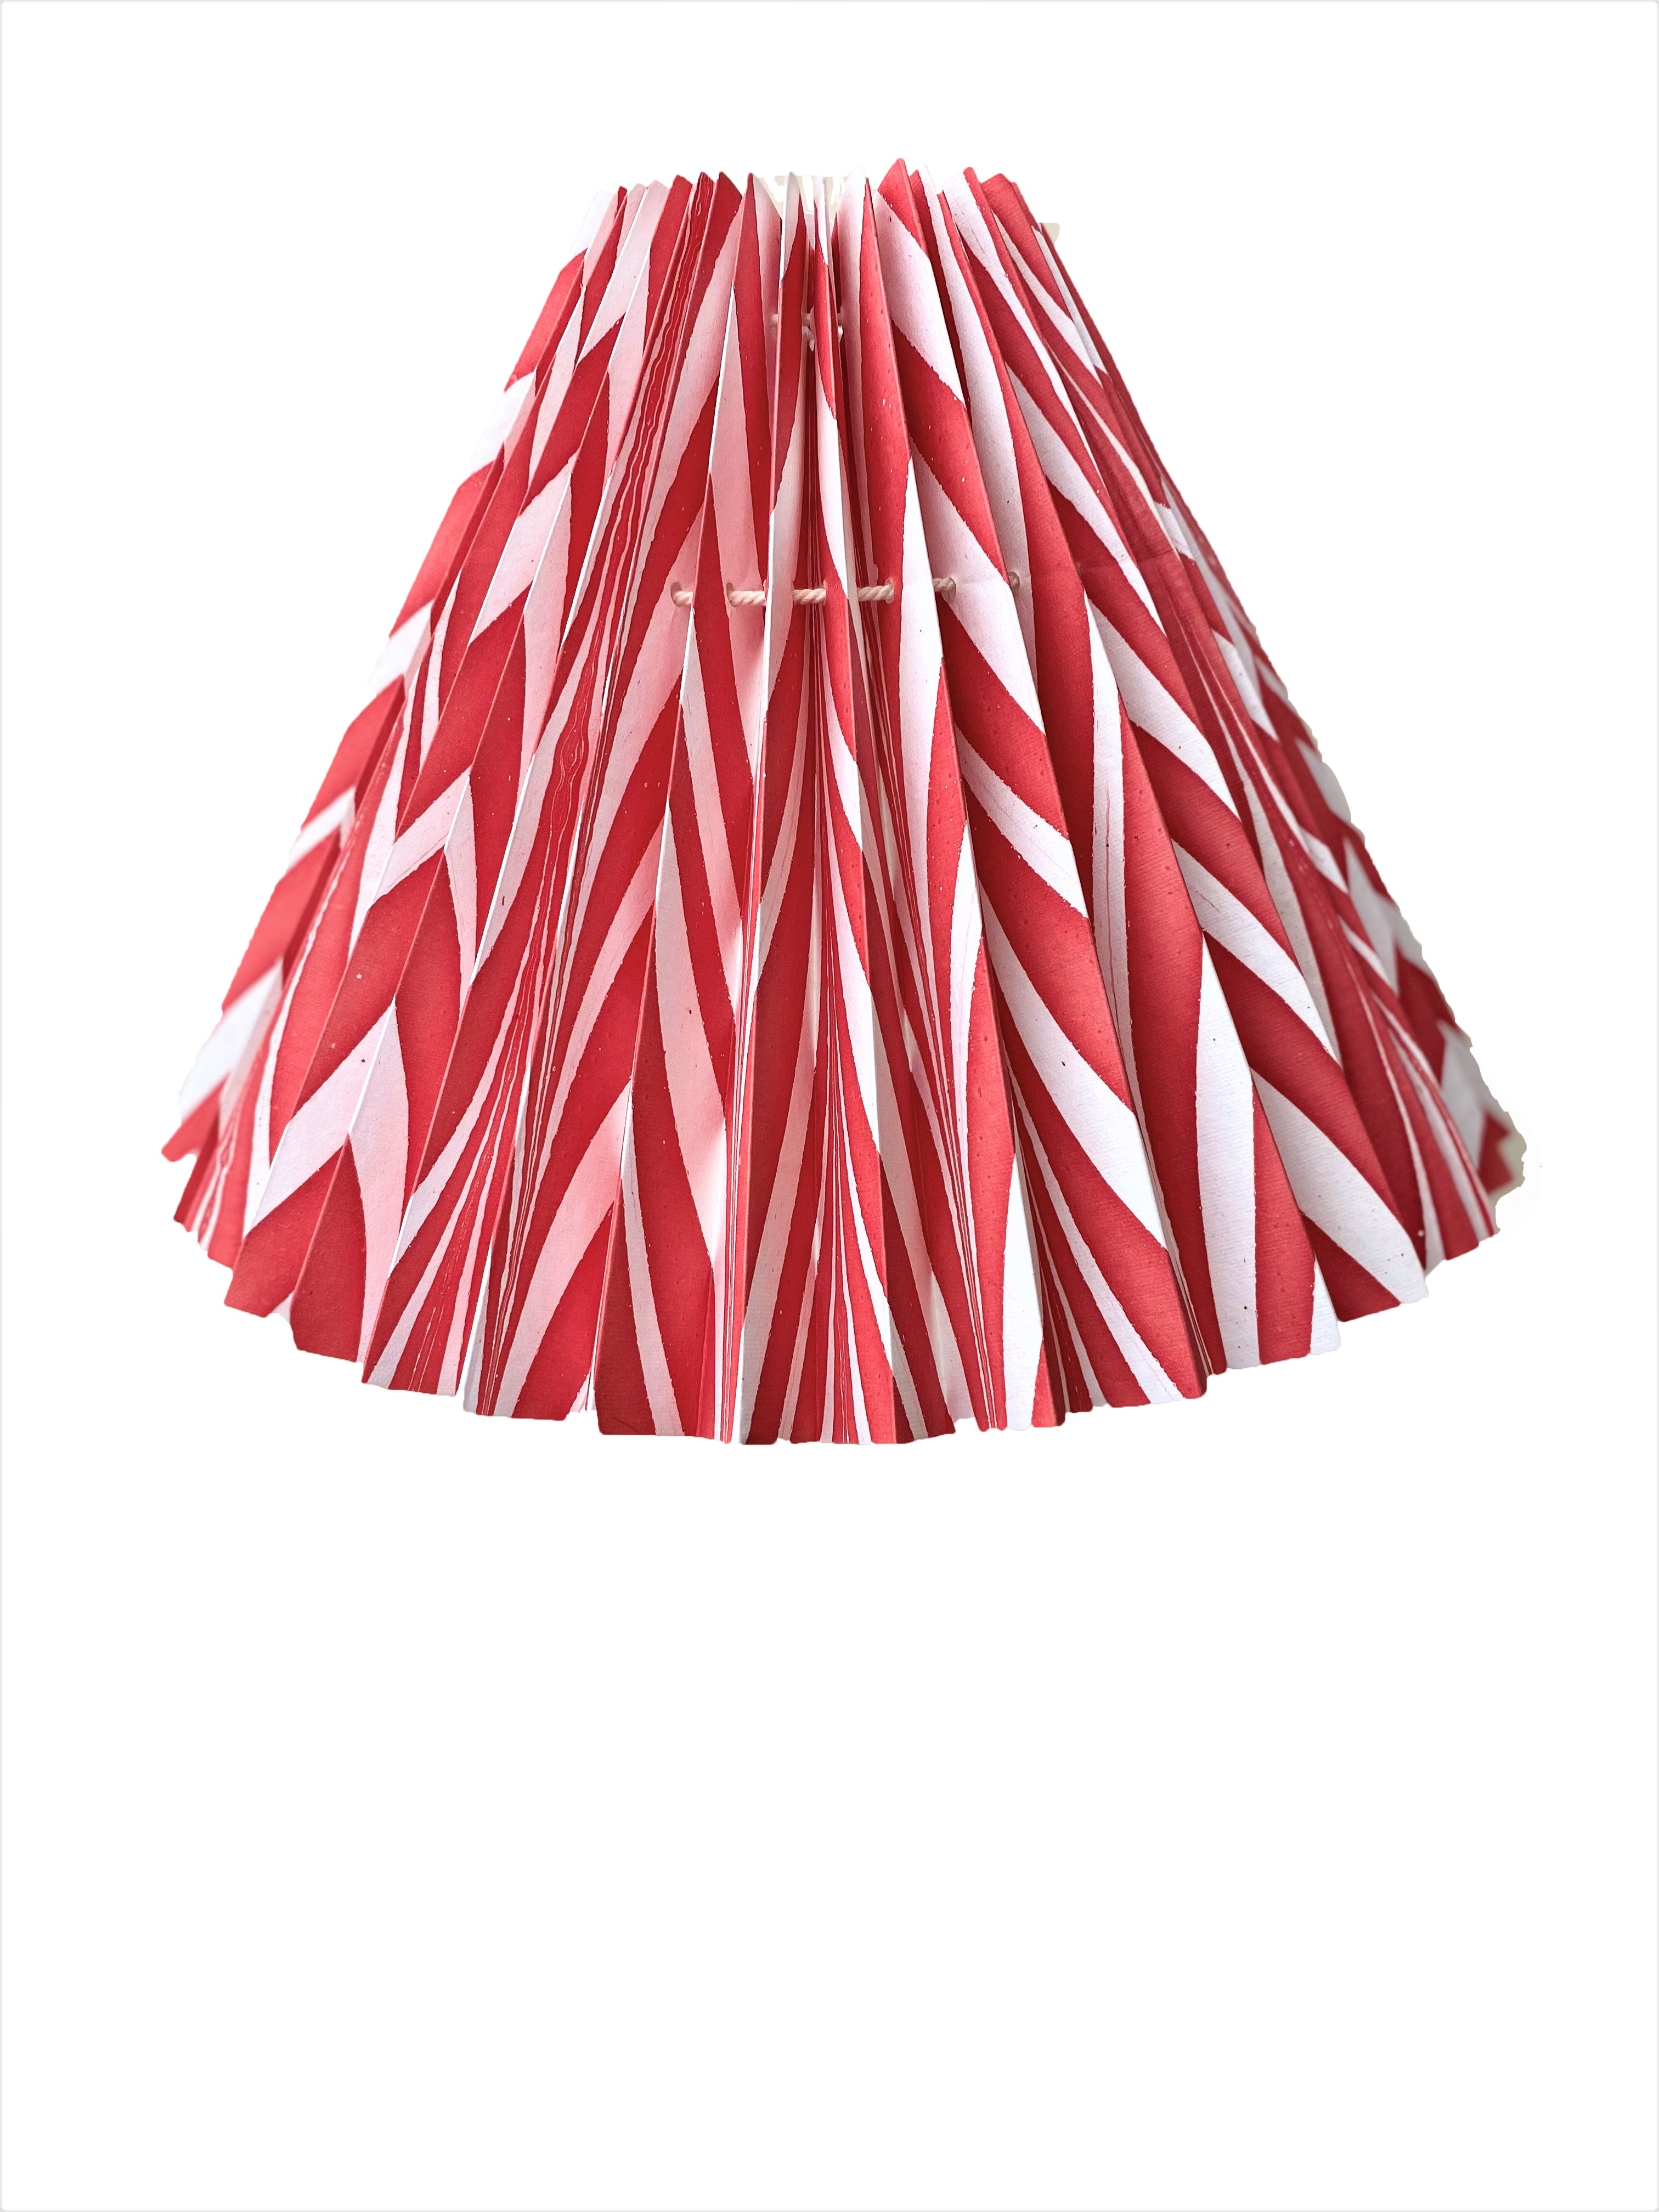 HANDMADE PAPER LAMPSHADE IN BRIGHT RED AND WHITE CHEVRON - Sale 30% off.